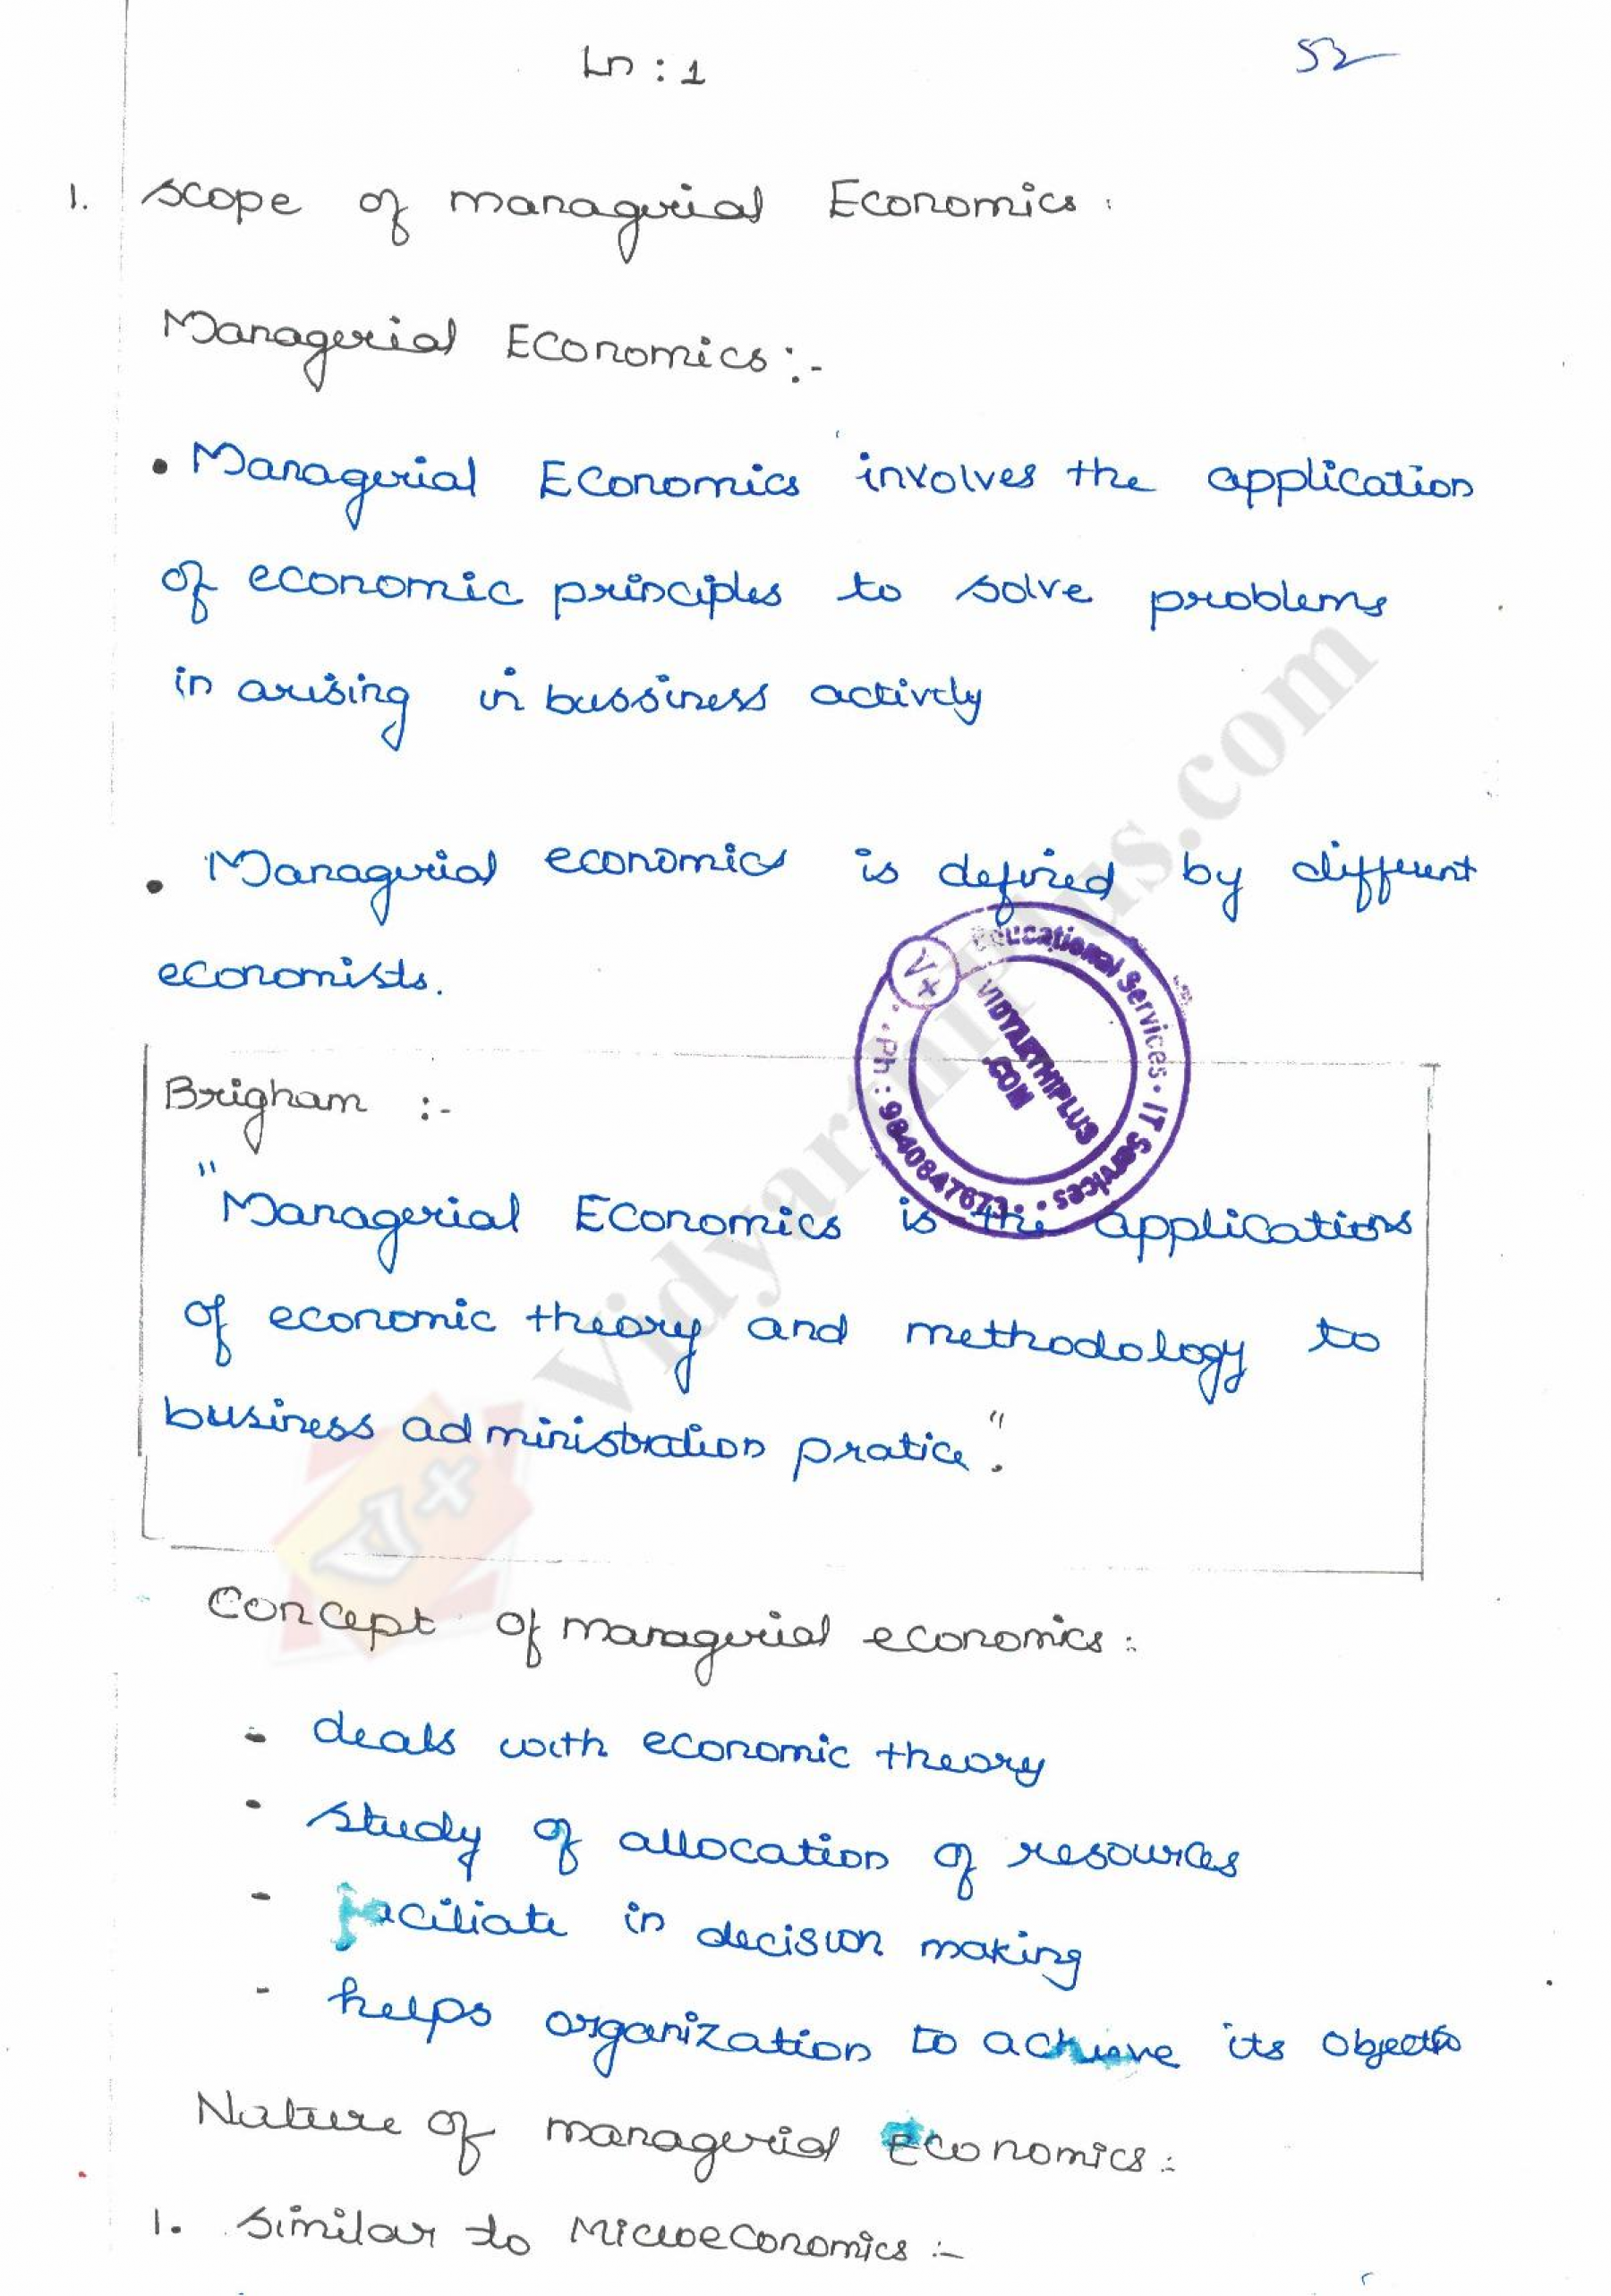 nature and scope of managerial economics notes